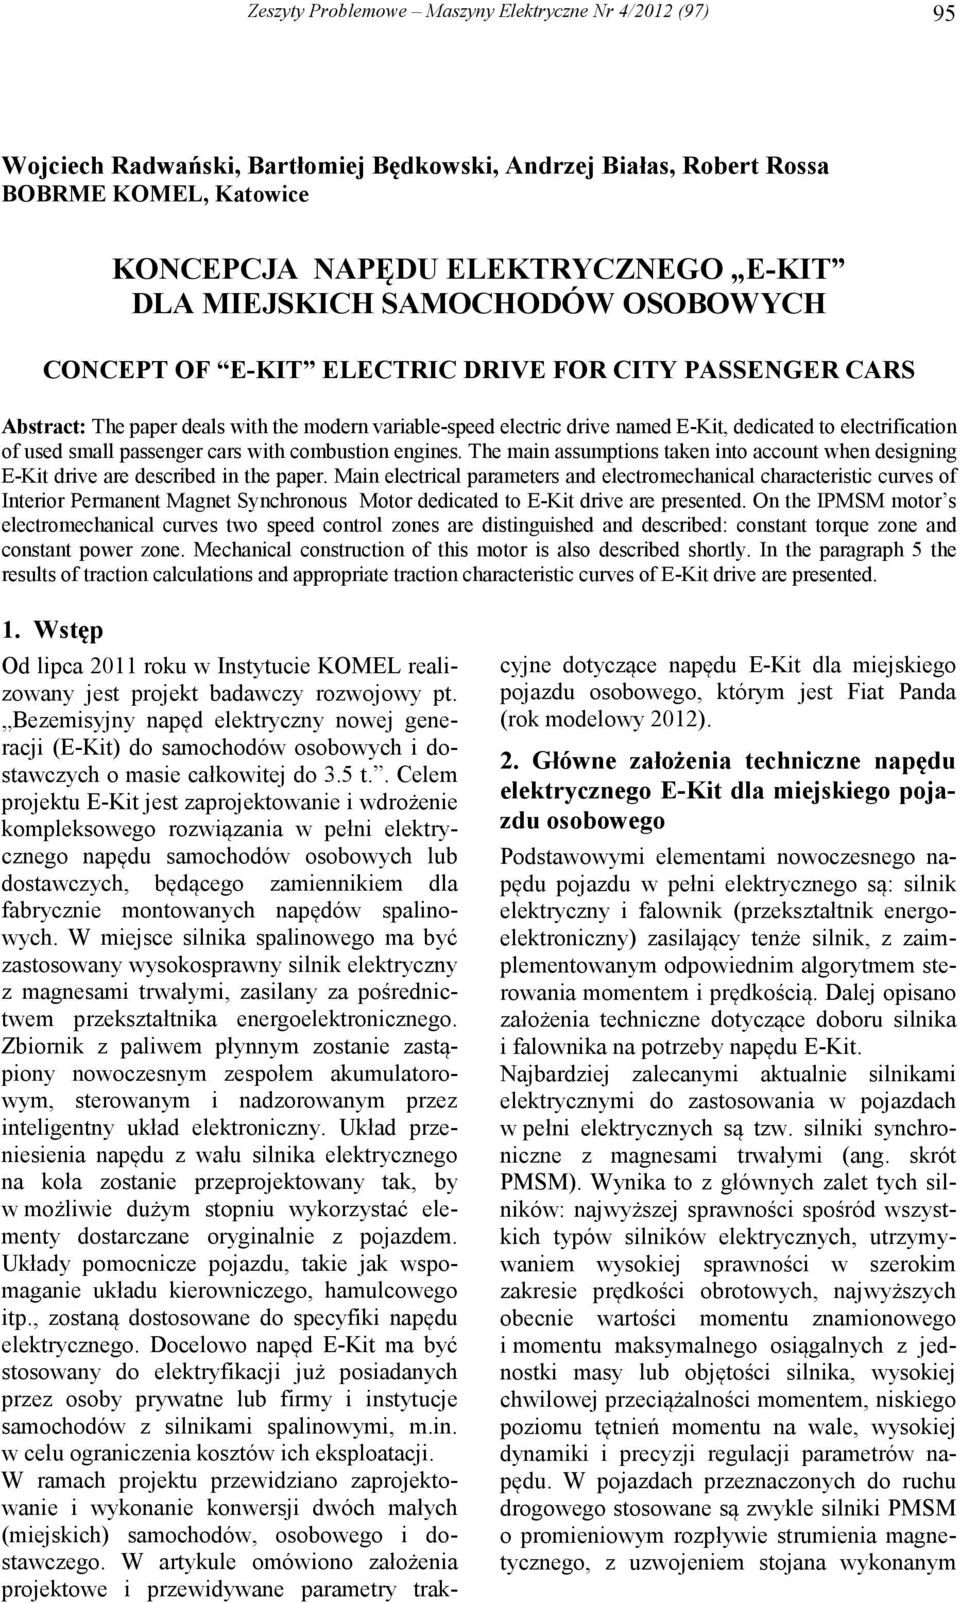 electrification of used small passenger cars with combustion engines. The main assumptions taken into account when designing E-Kit drive are described in the paper.